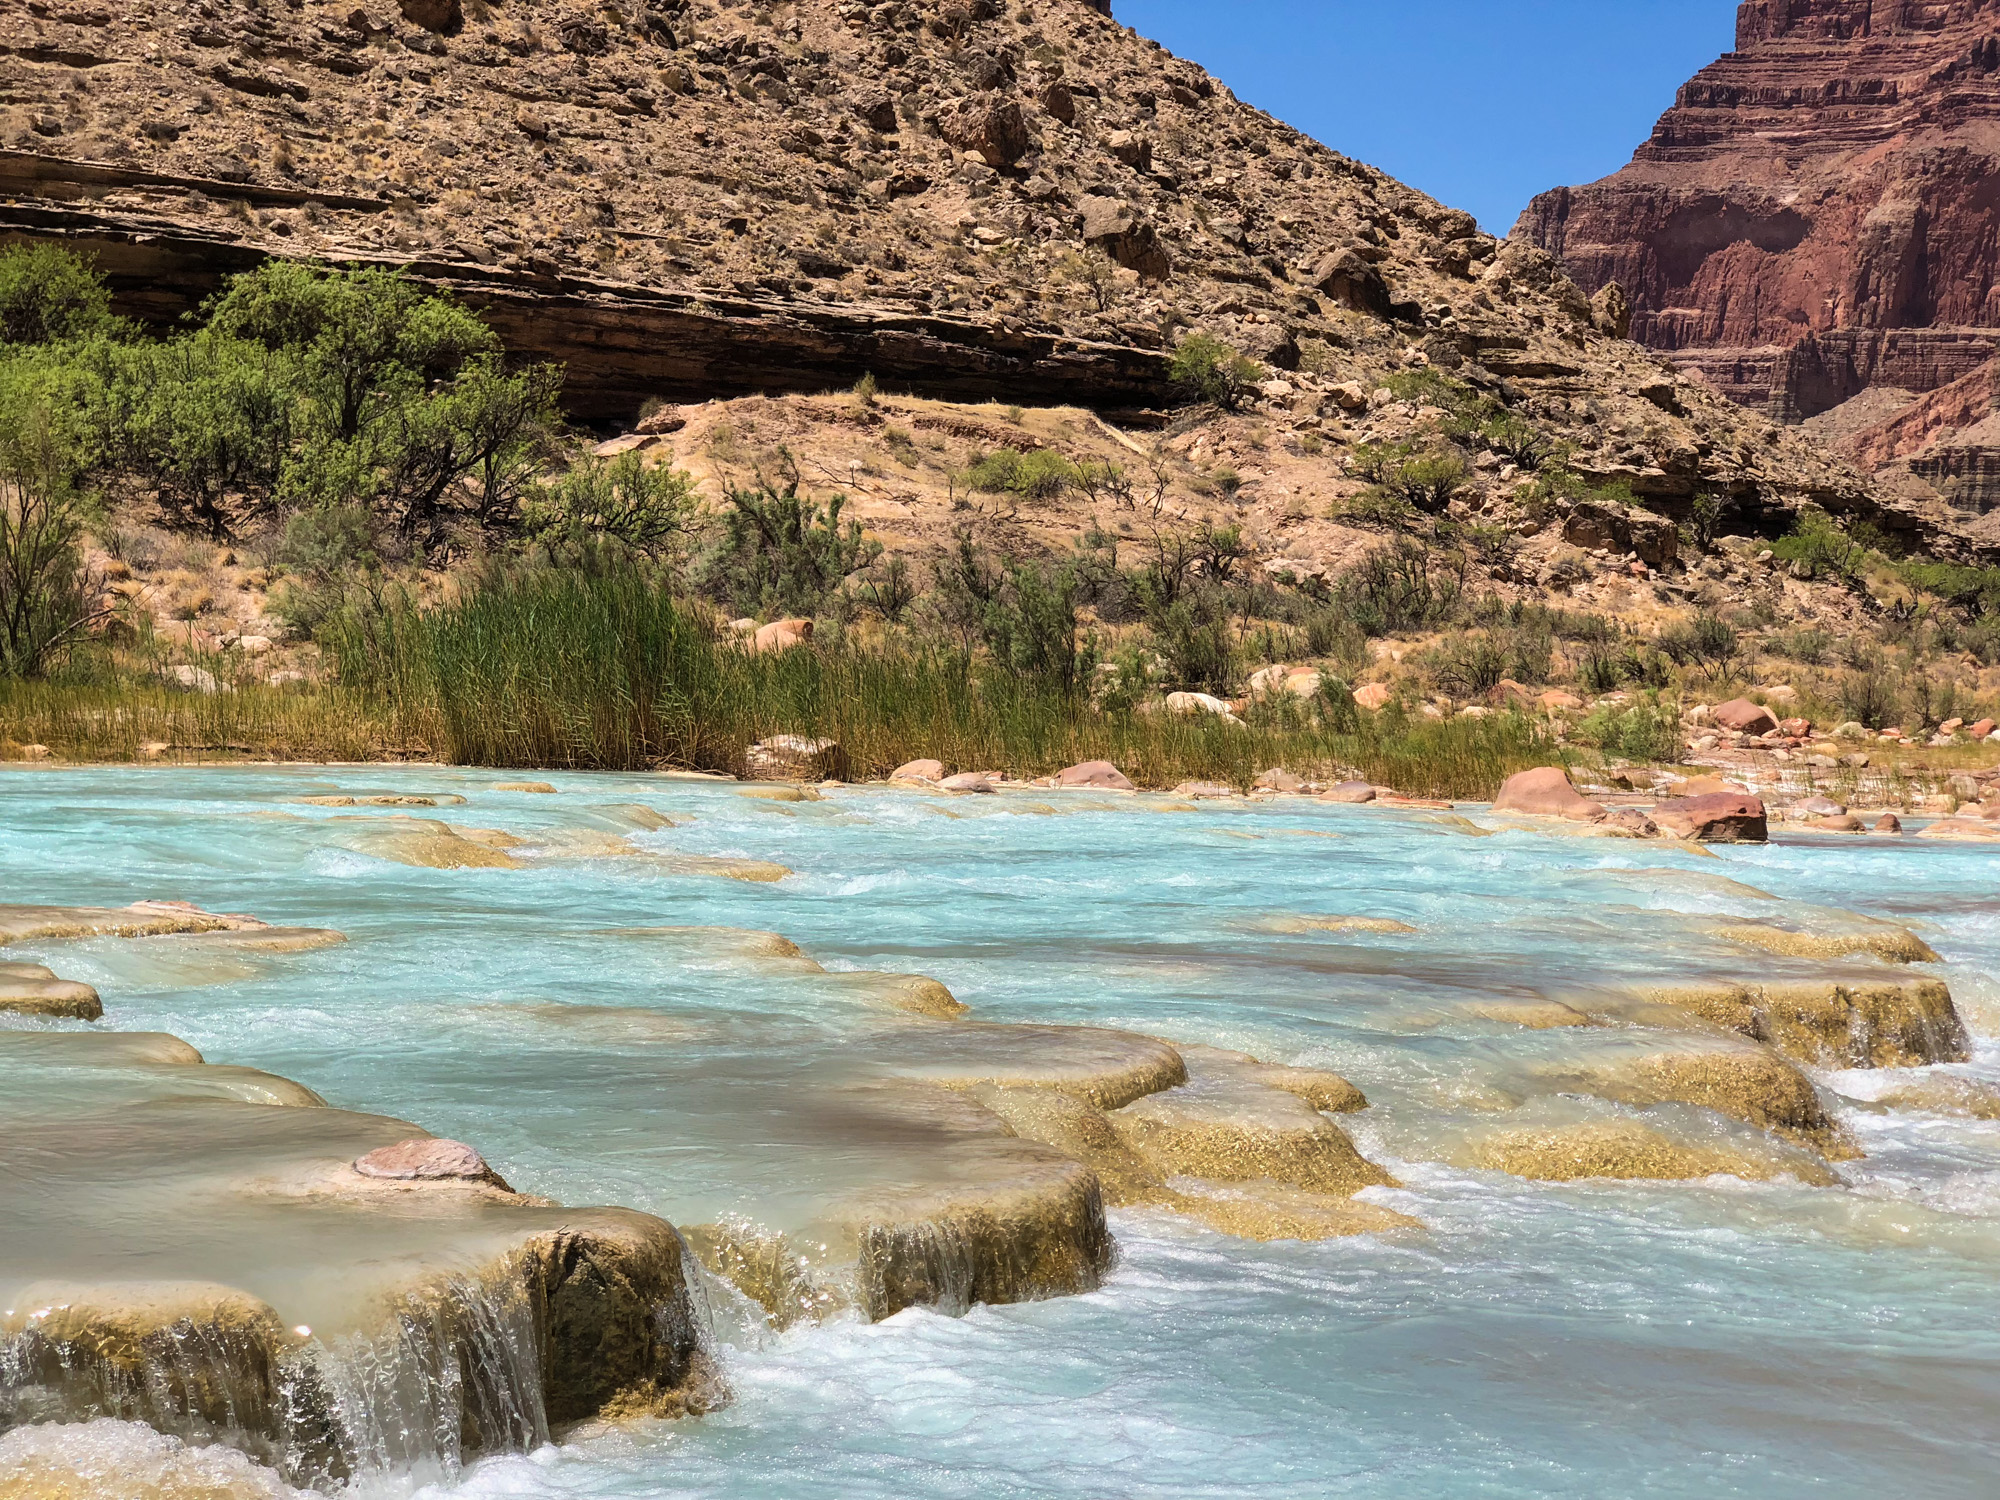  Travertine ledges and turquoise blue of the Little Colorado River 